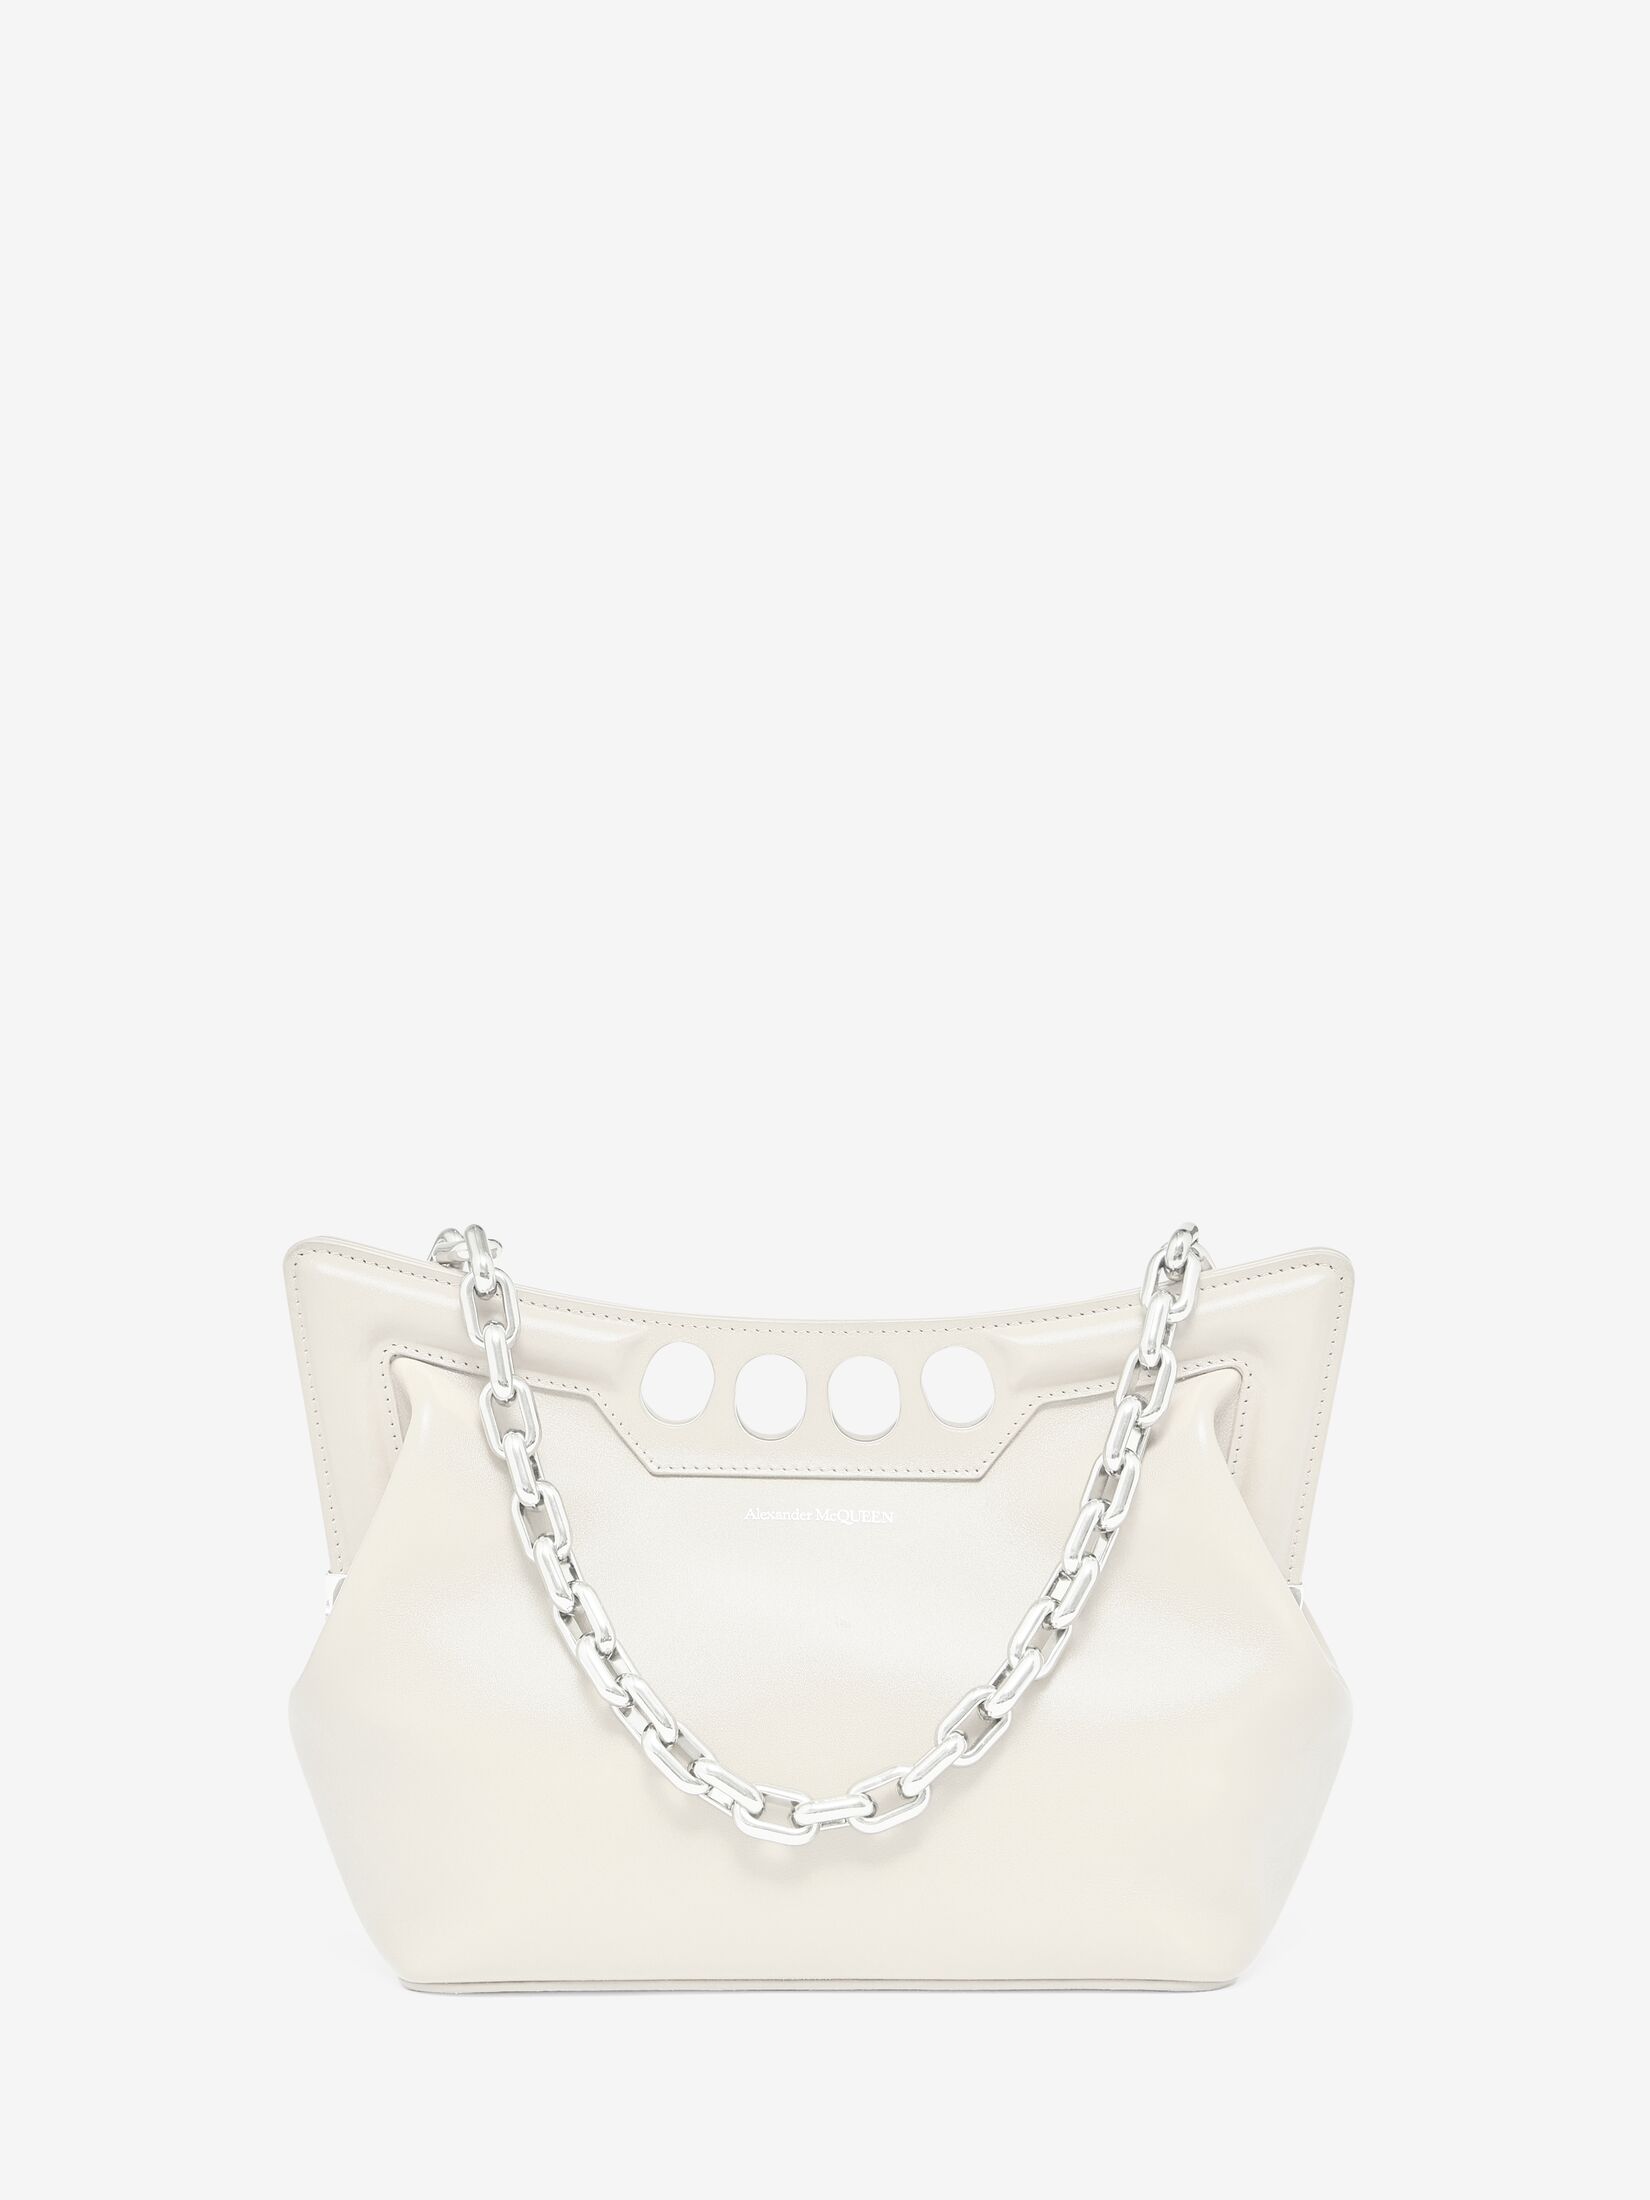 The Peak Bag Small in Soft Ivory | Alexander McQueen US